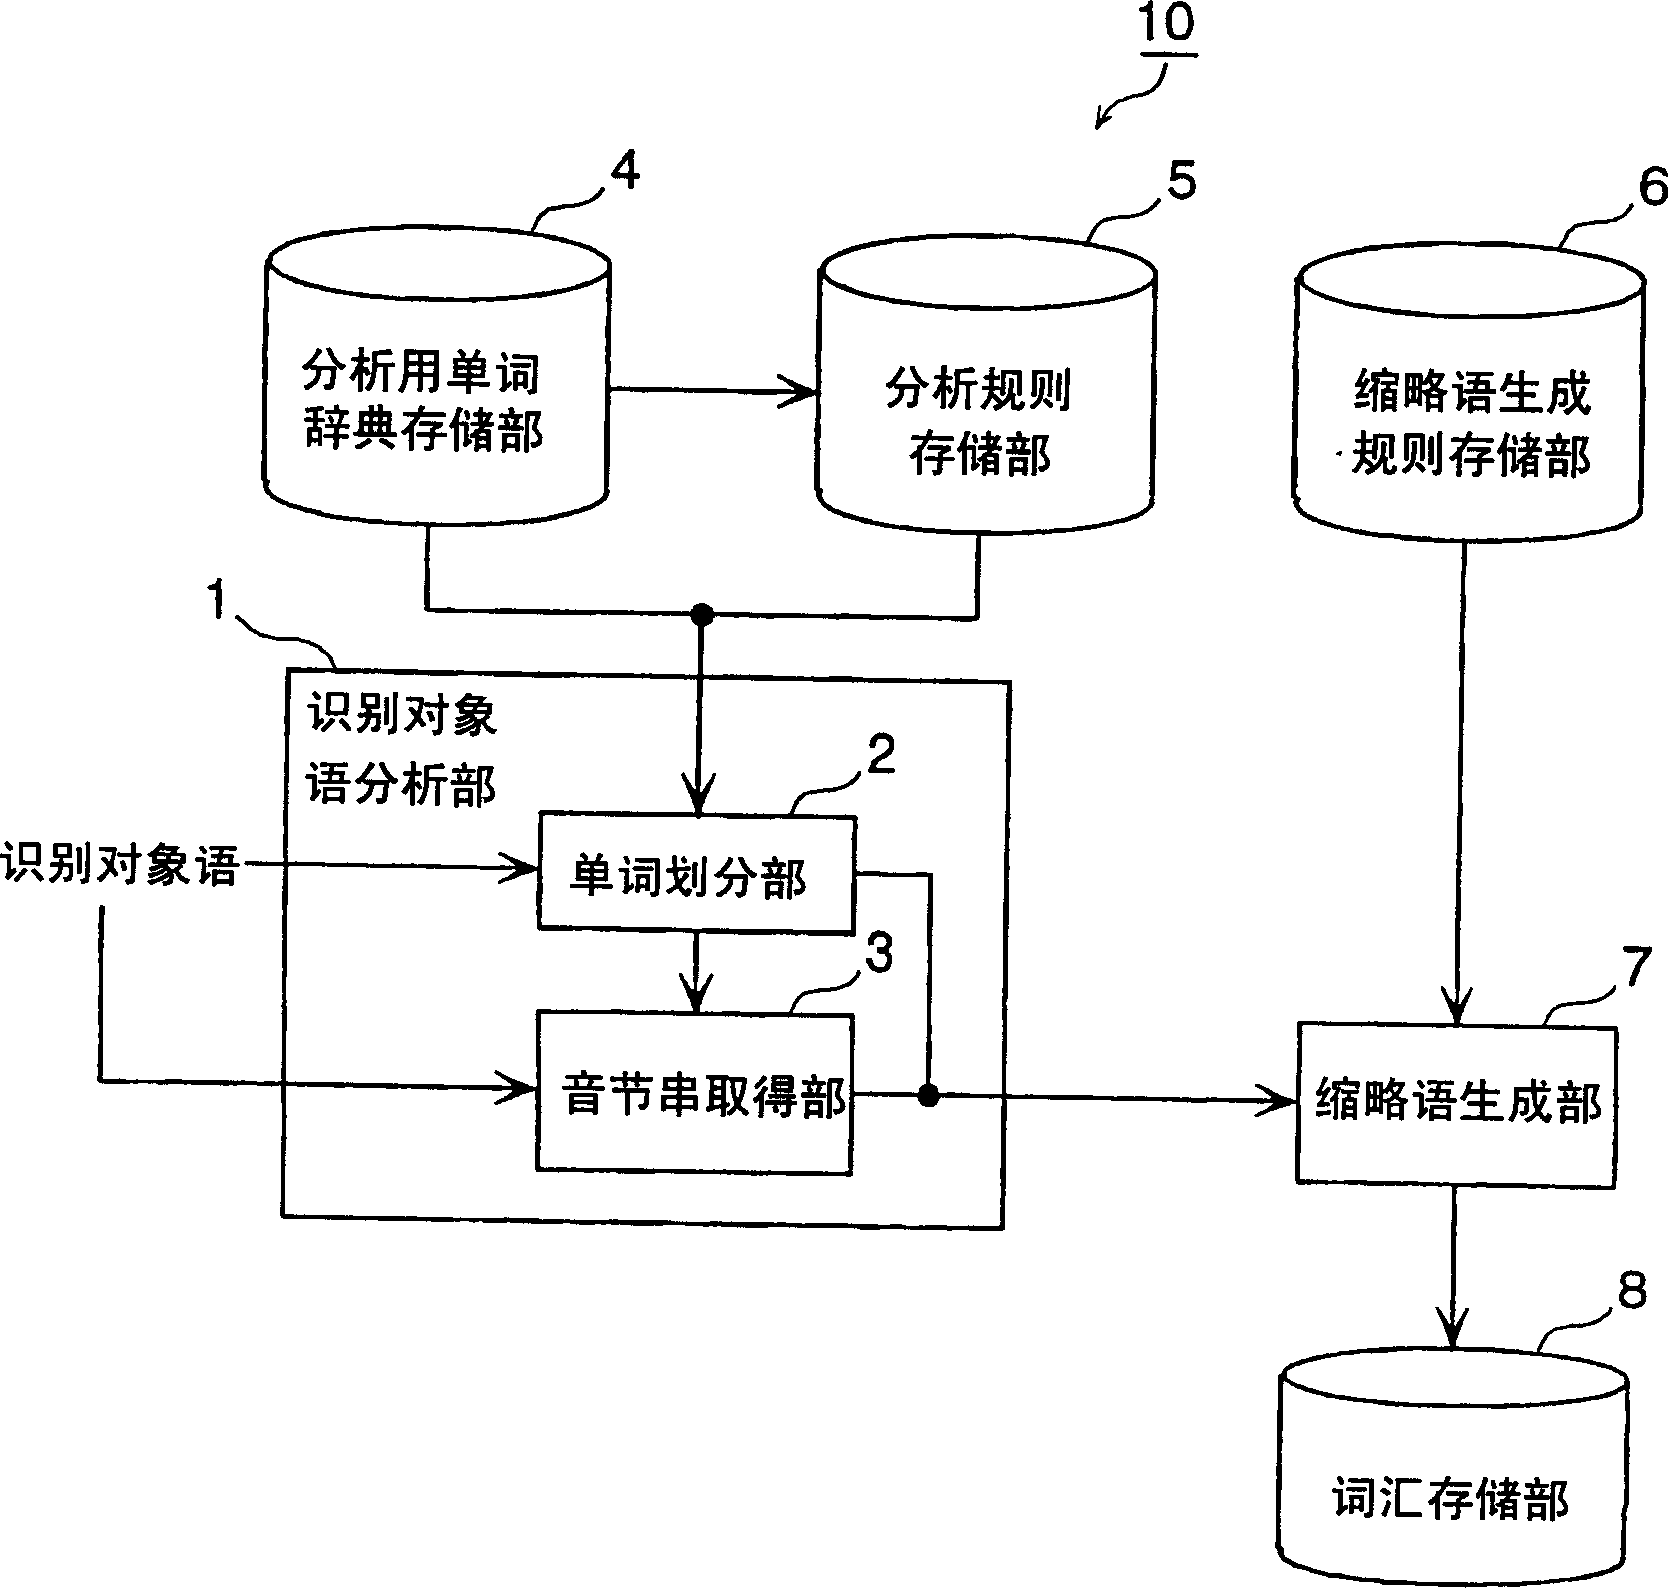 Speech recognition dictionary creation device and speech recognition device